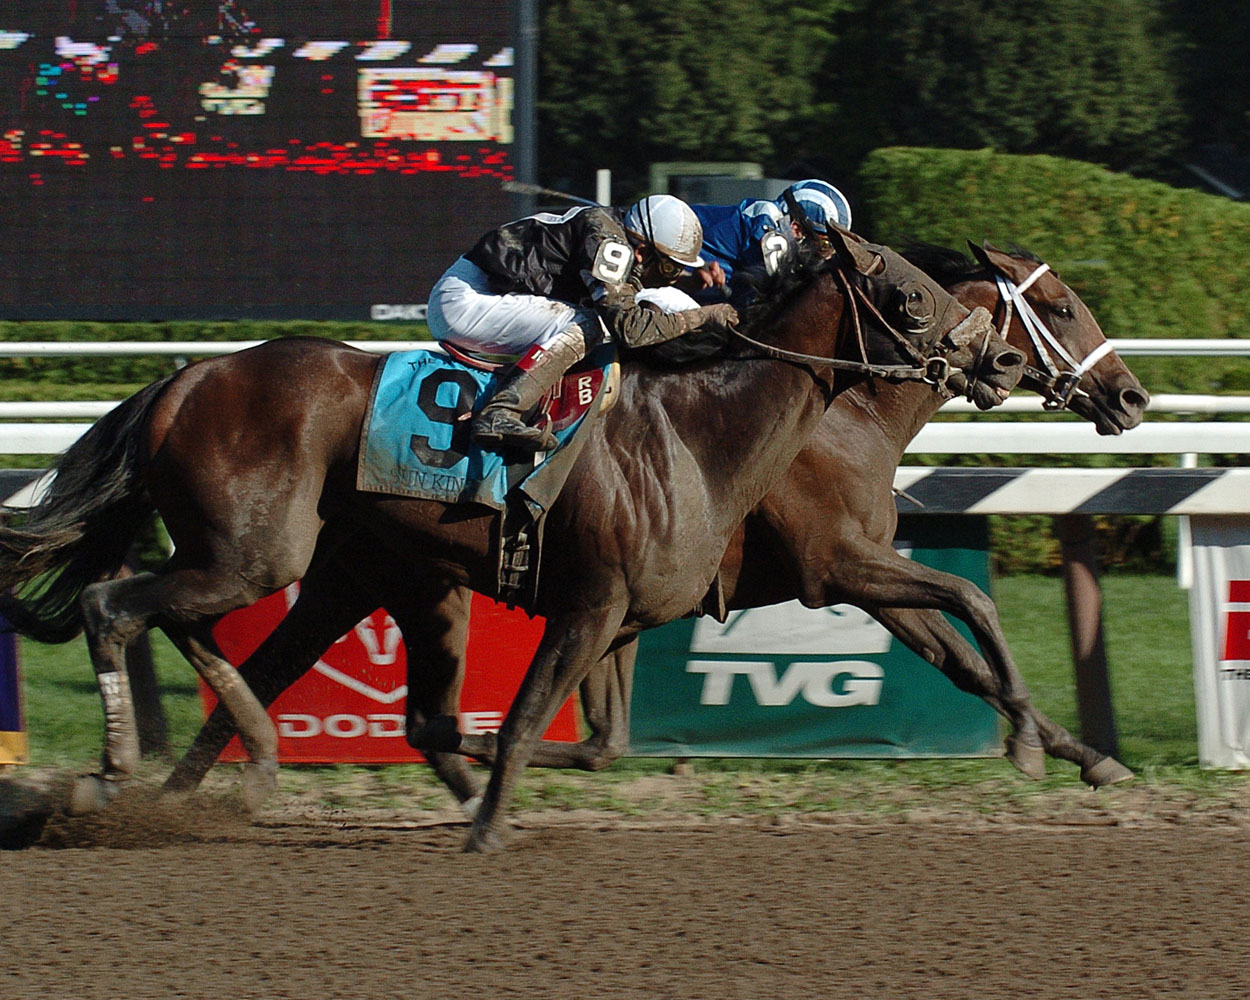 Invasor (Fernando Jara up) at the finish, winning the 2006 Whitney by a nose (NYRA)